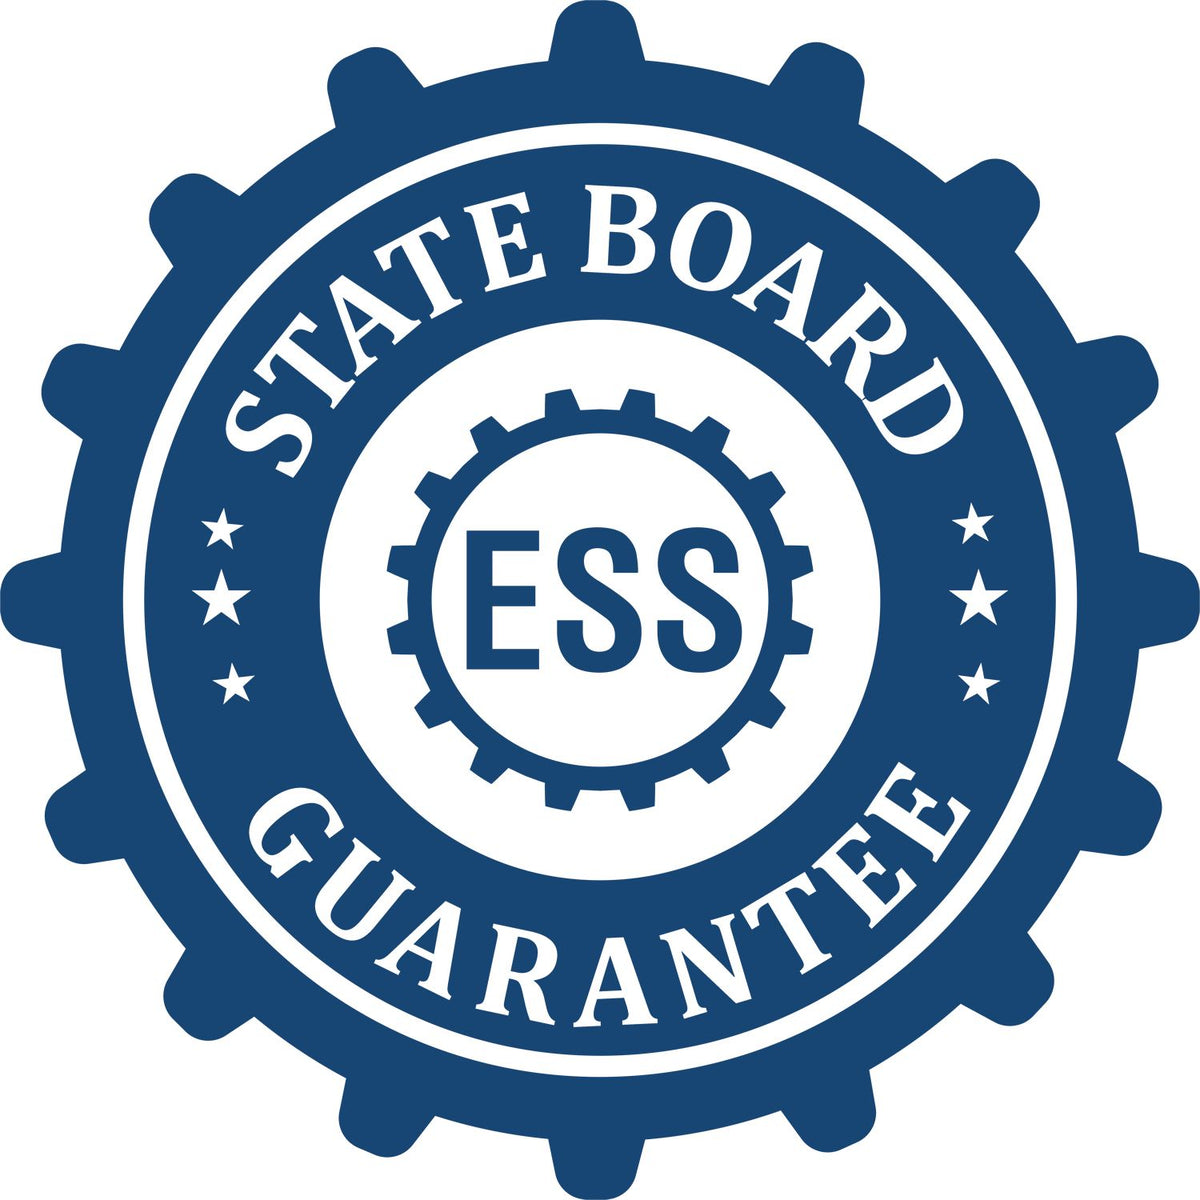 Forester Slim Pre-Inked Rubber Stamp of Seal 3007FOR State Board Guarantee